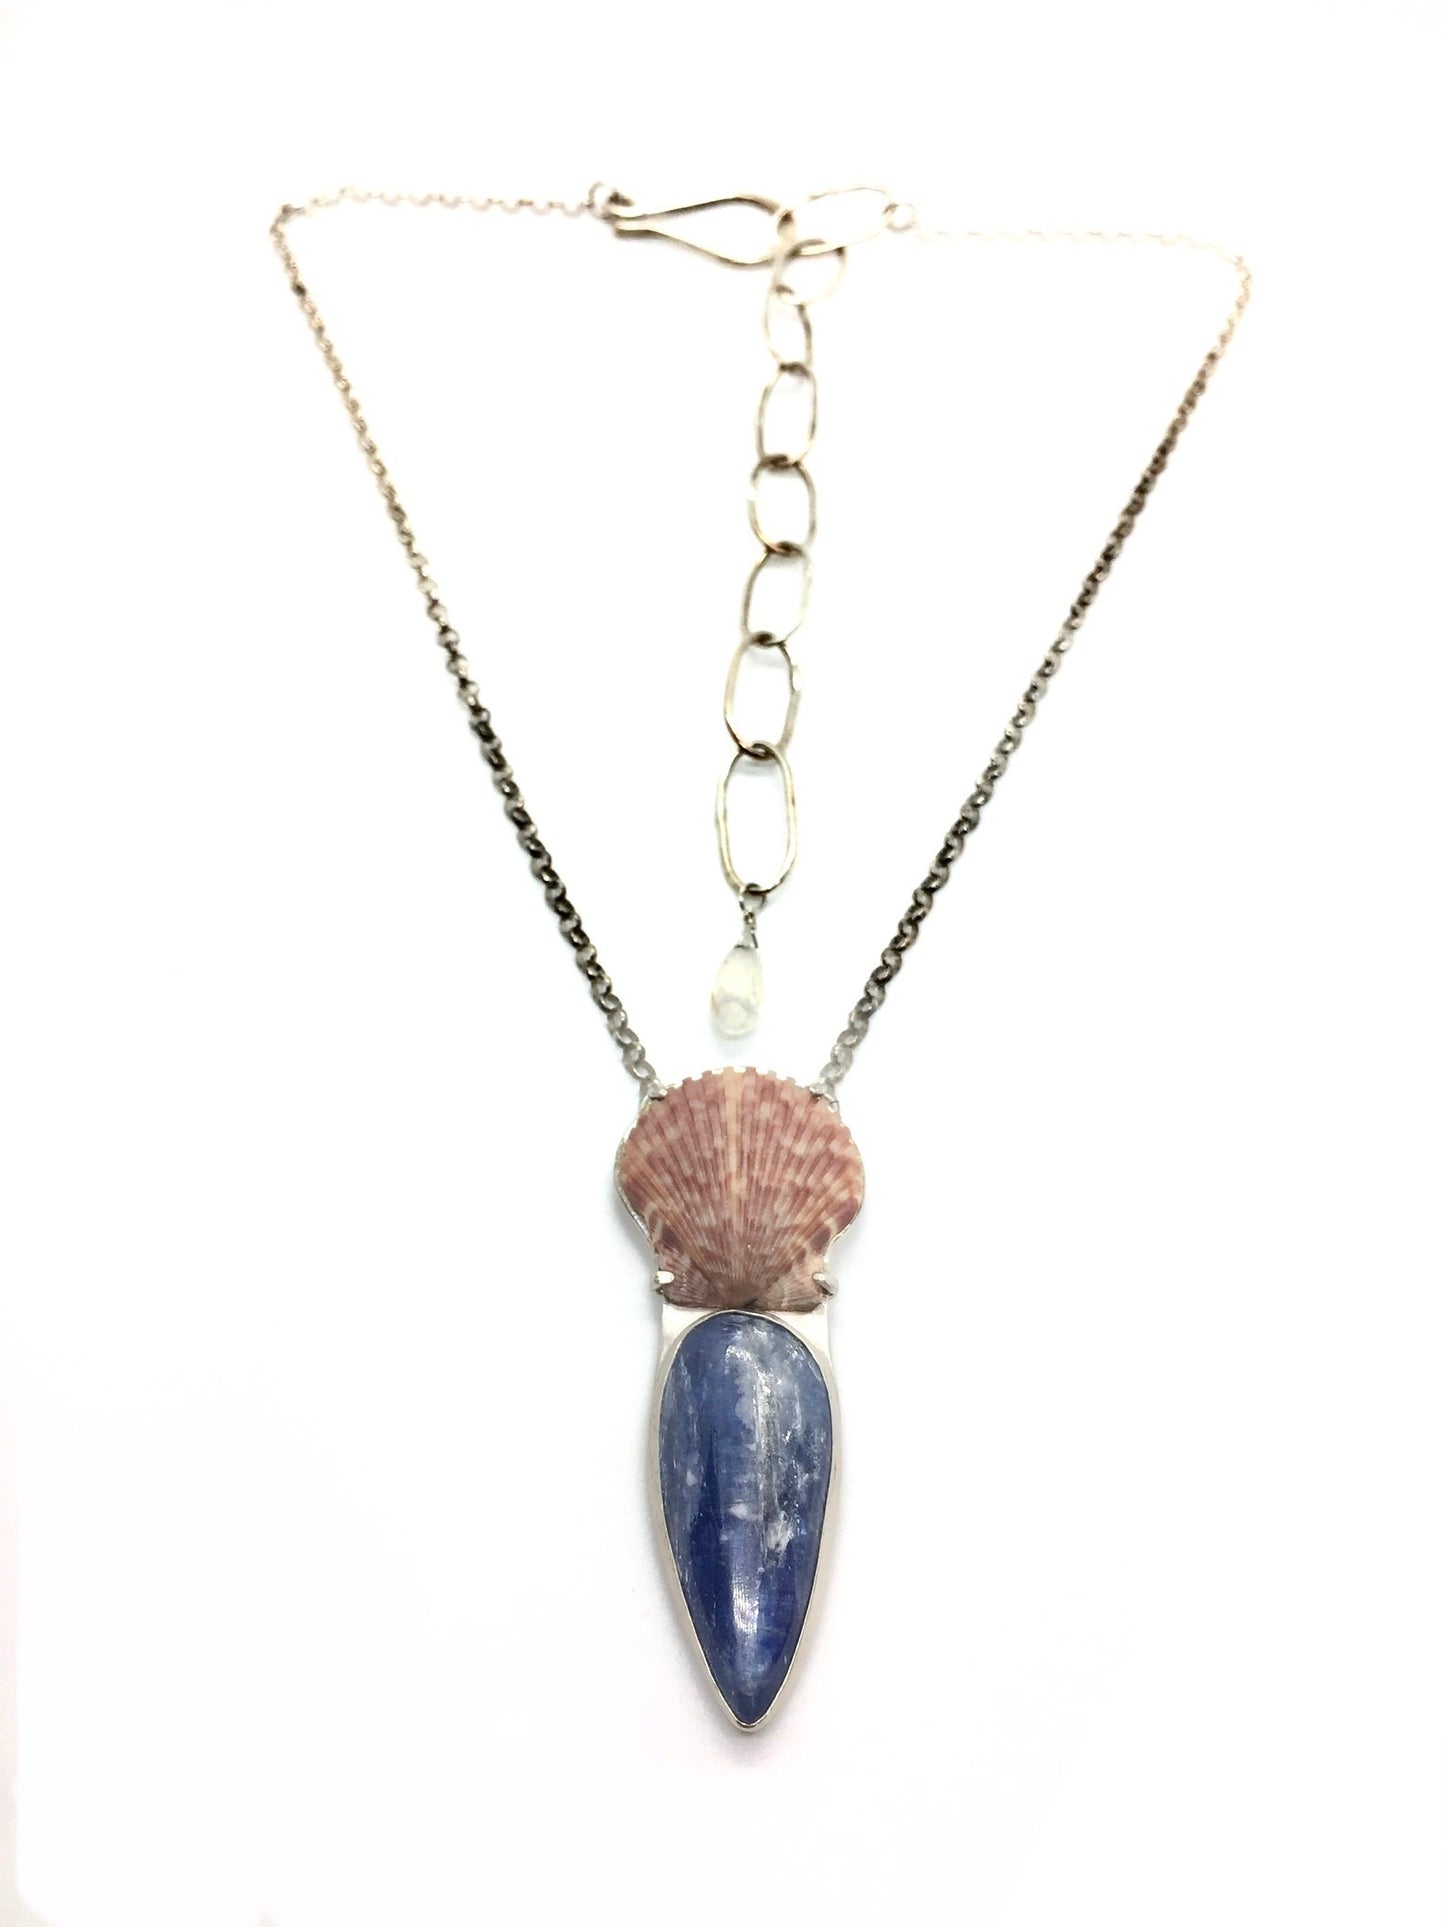 Kyanite & Scallop Shell Necklace in Sterling Silver with Moonstone Chain Accent